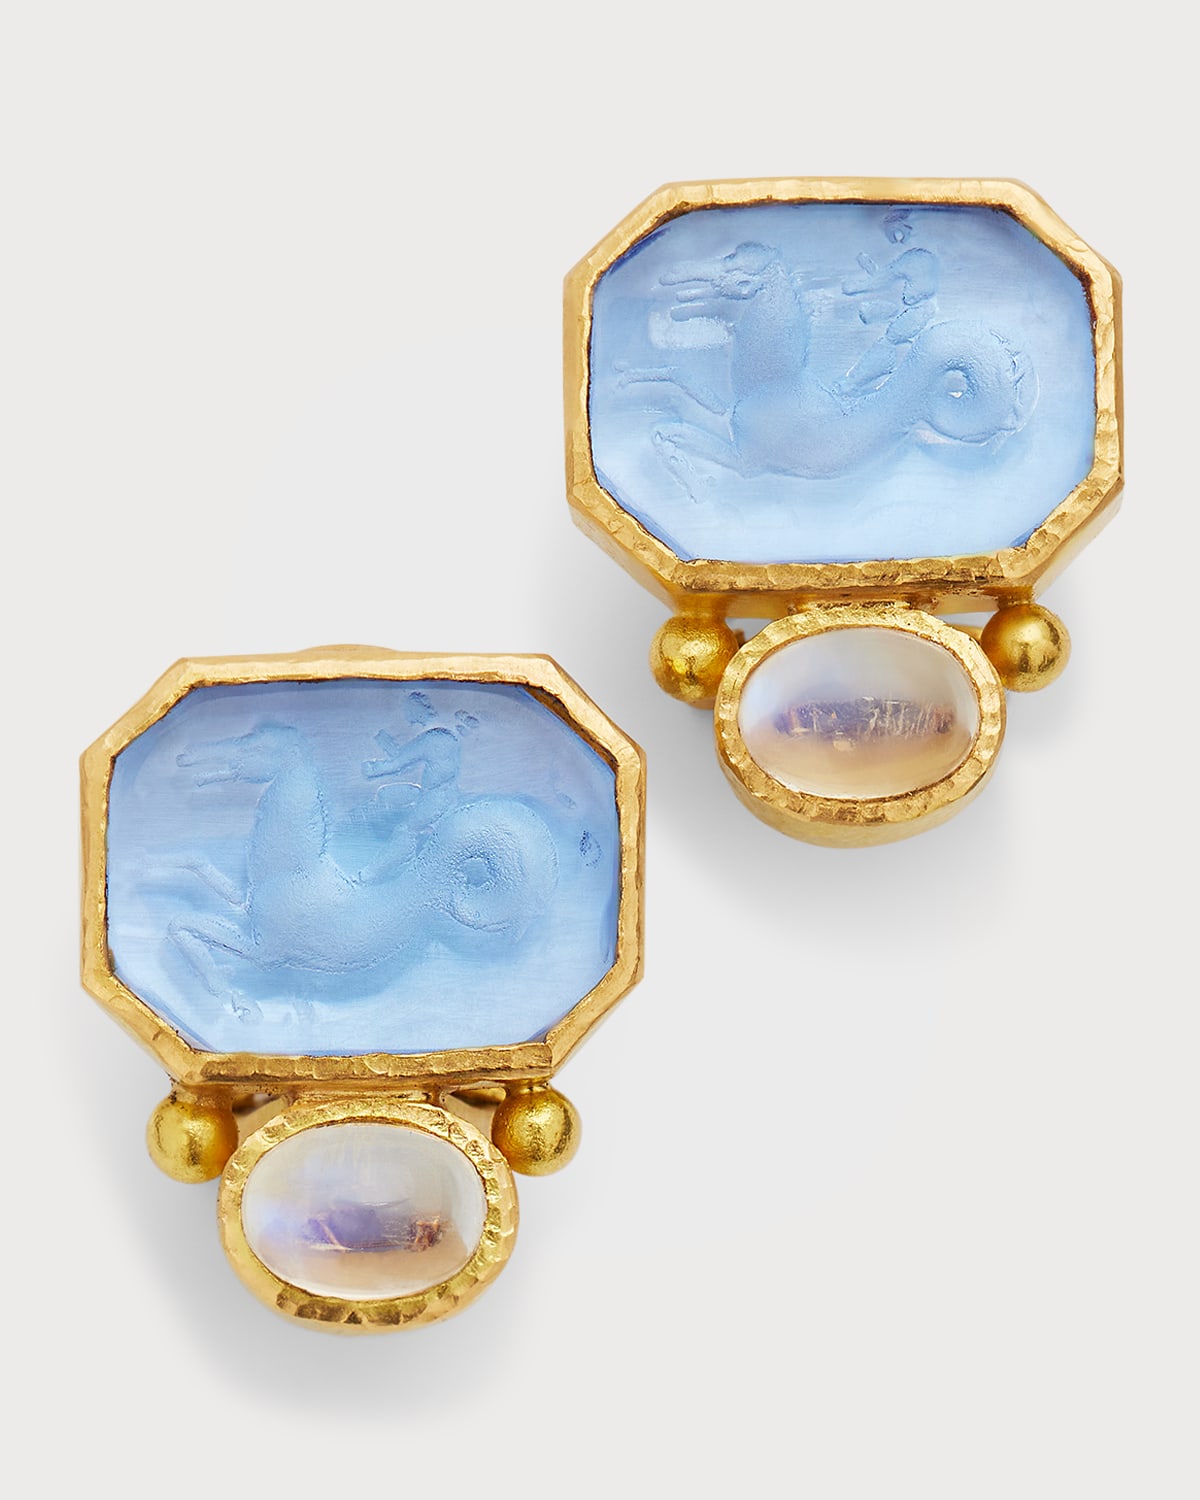 19K Cherub and Seahorse Earrings with Cabochon Stones